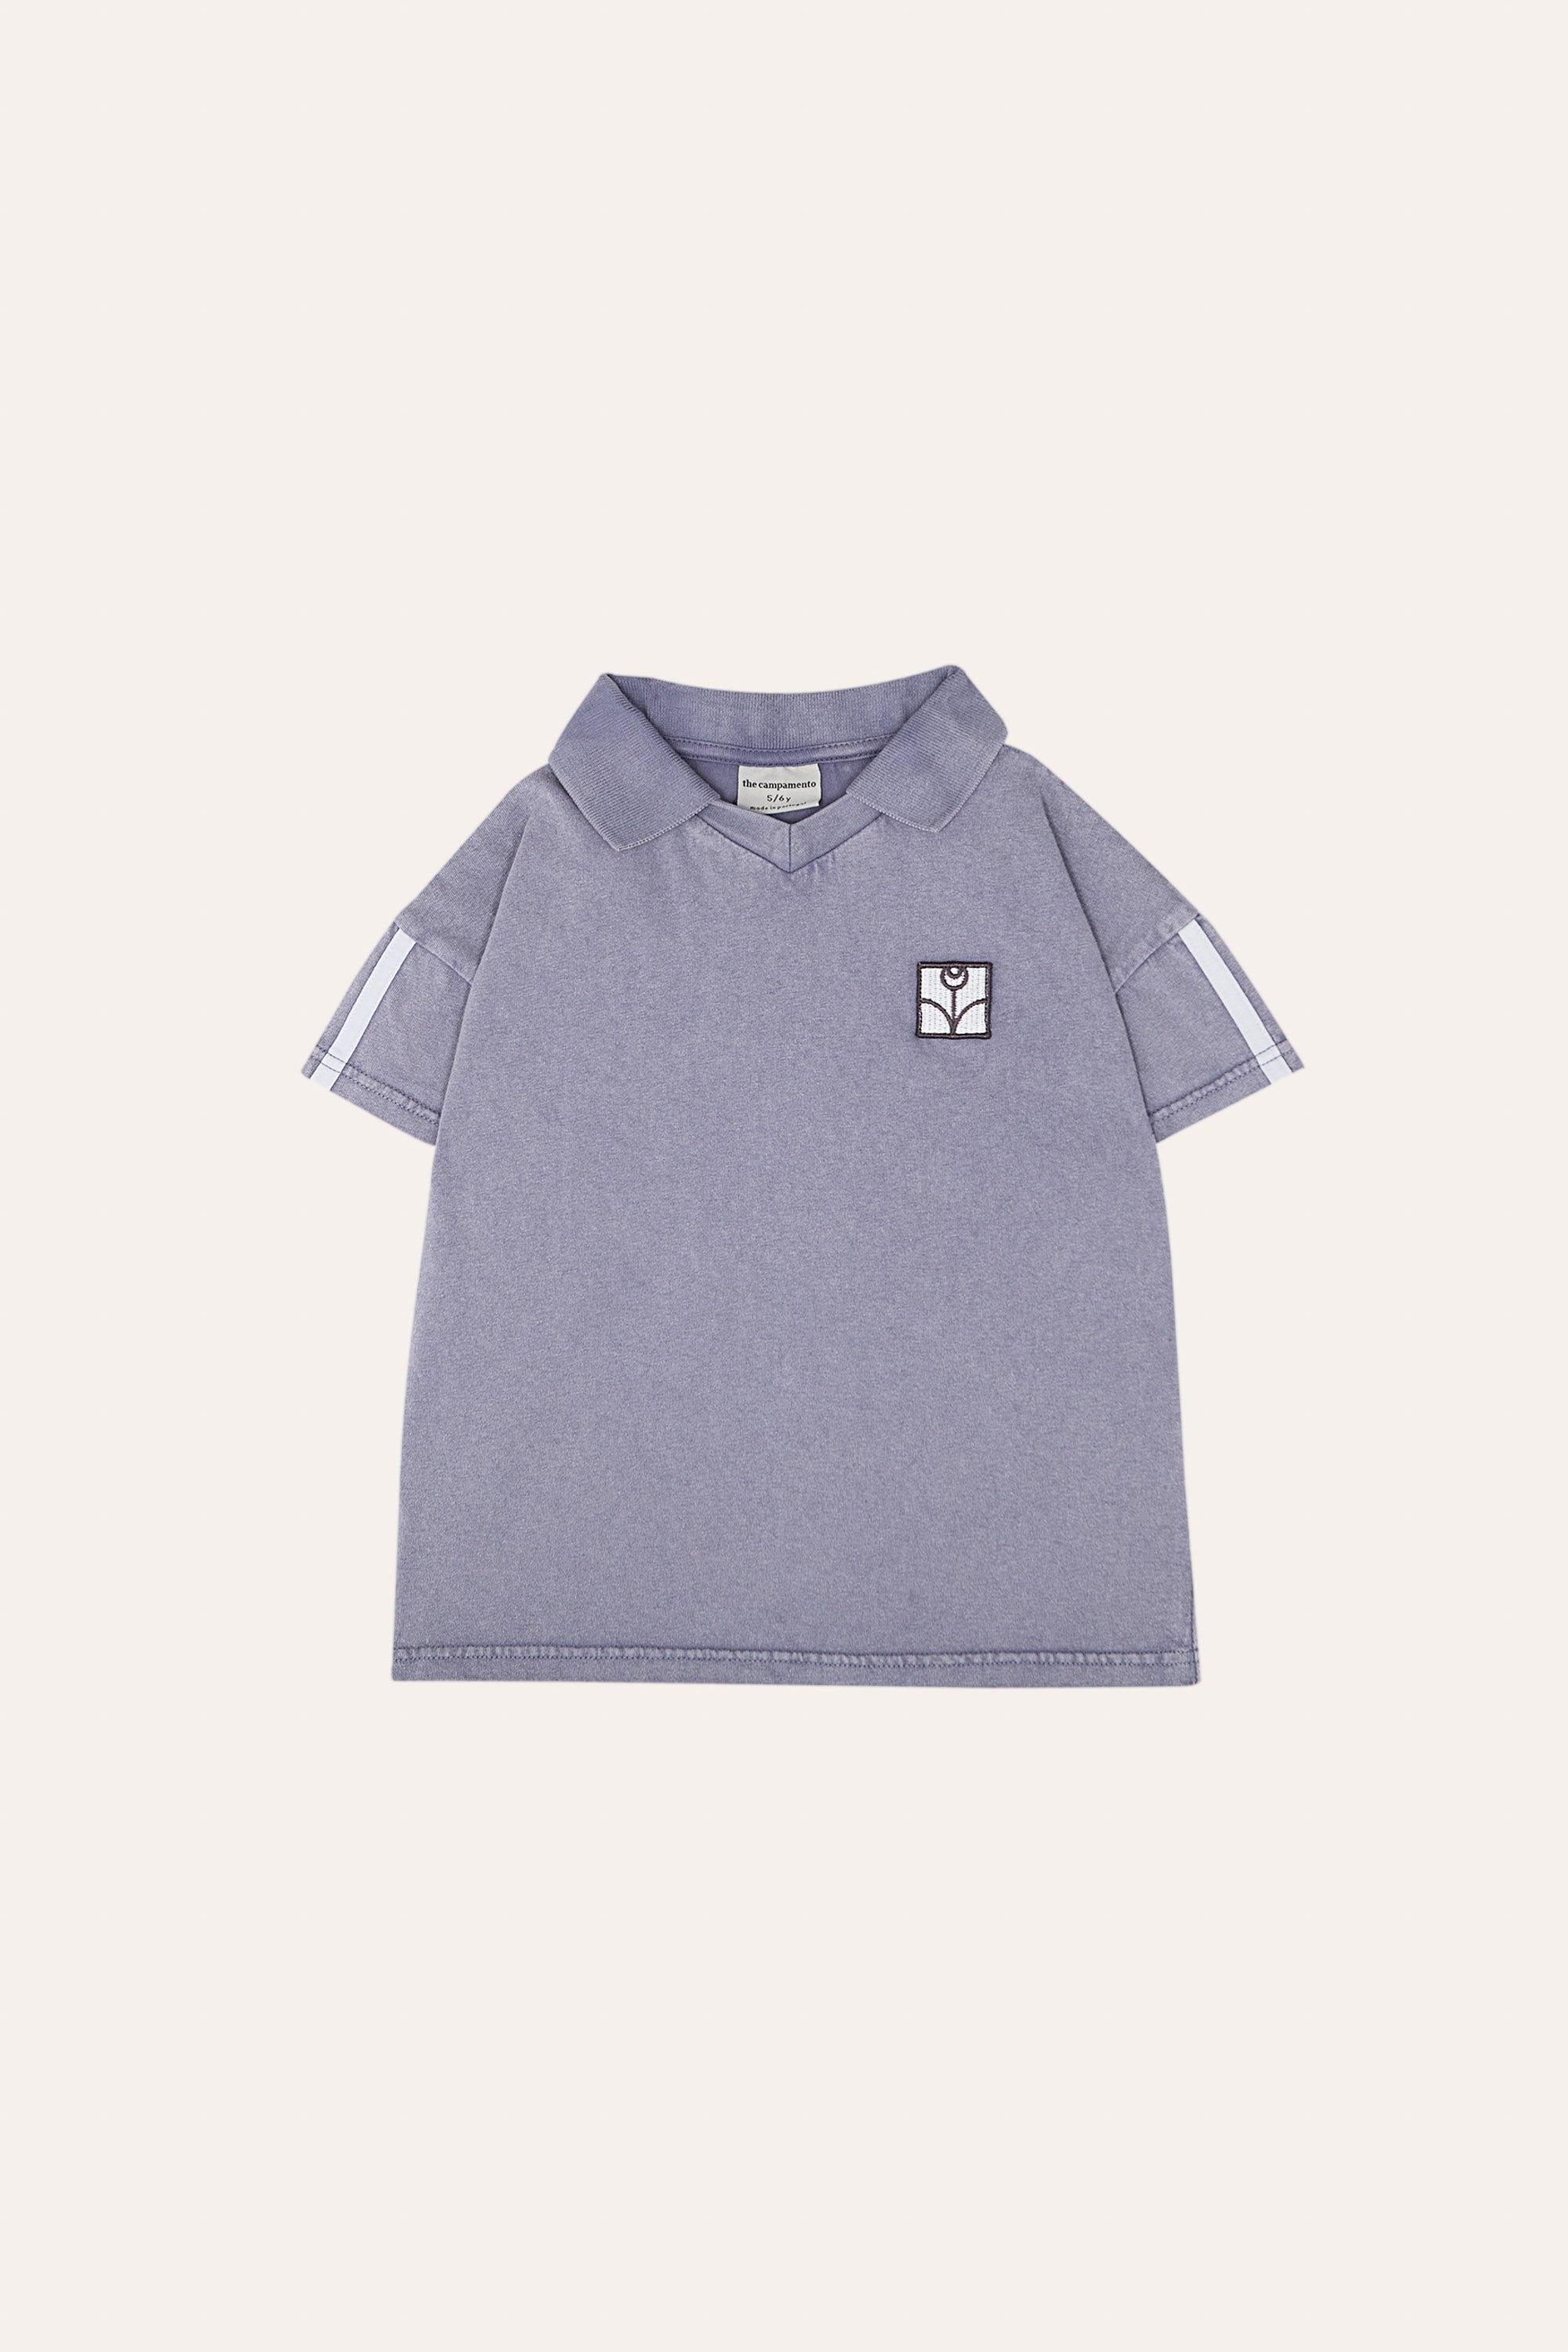 The Campamento - blue washed polo